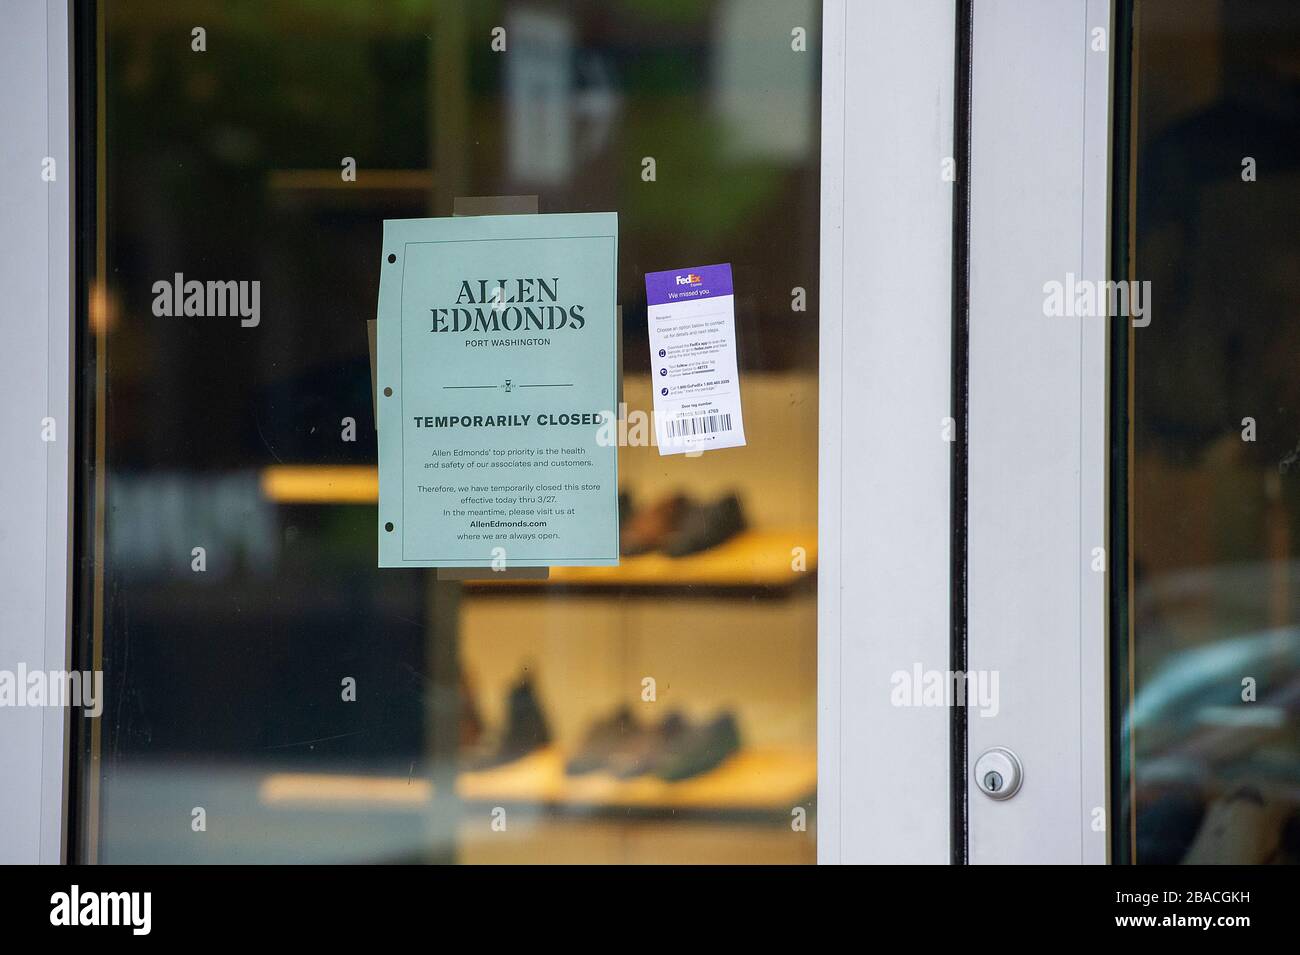 March 26, 2020: The world wide Pandemic Covid-19 impacts daily business activities like Allen Edmonds dress shoes Downtown Austin, Texas. Mario Cantu/CSM Stock Photo